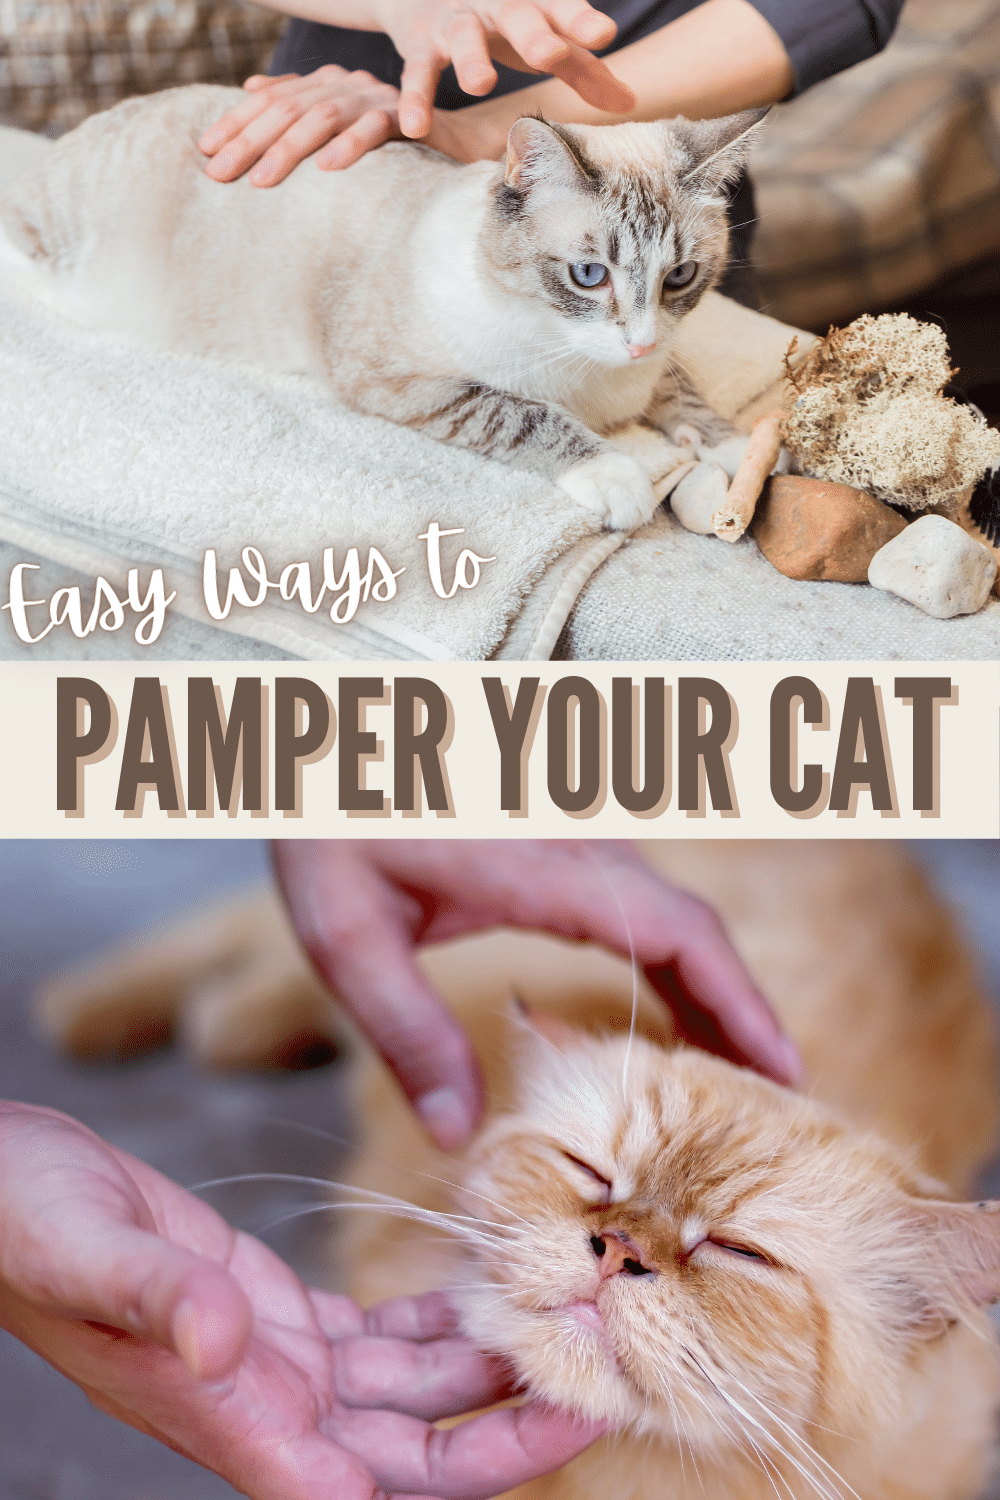 Cat owners know how much our feline friends contribute to our lives. Here are some ways to pamper your cat to show affection for your adorable fur baby. #cat #felinefriend #catlover via @wondermomwannab